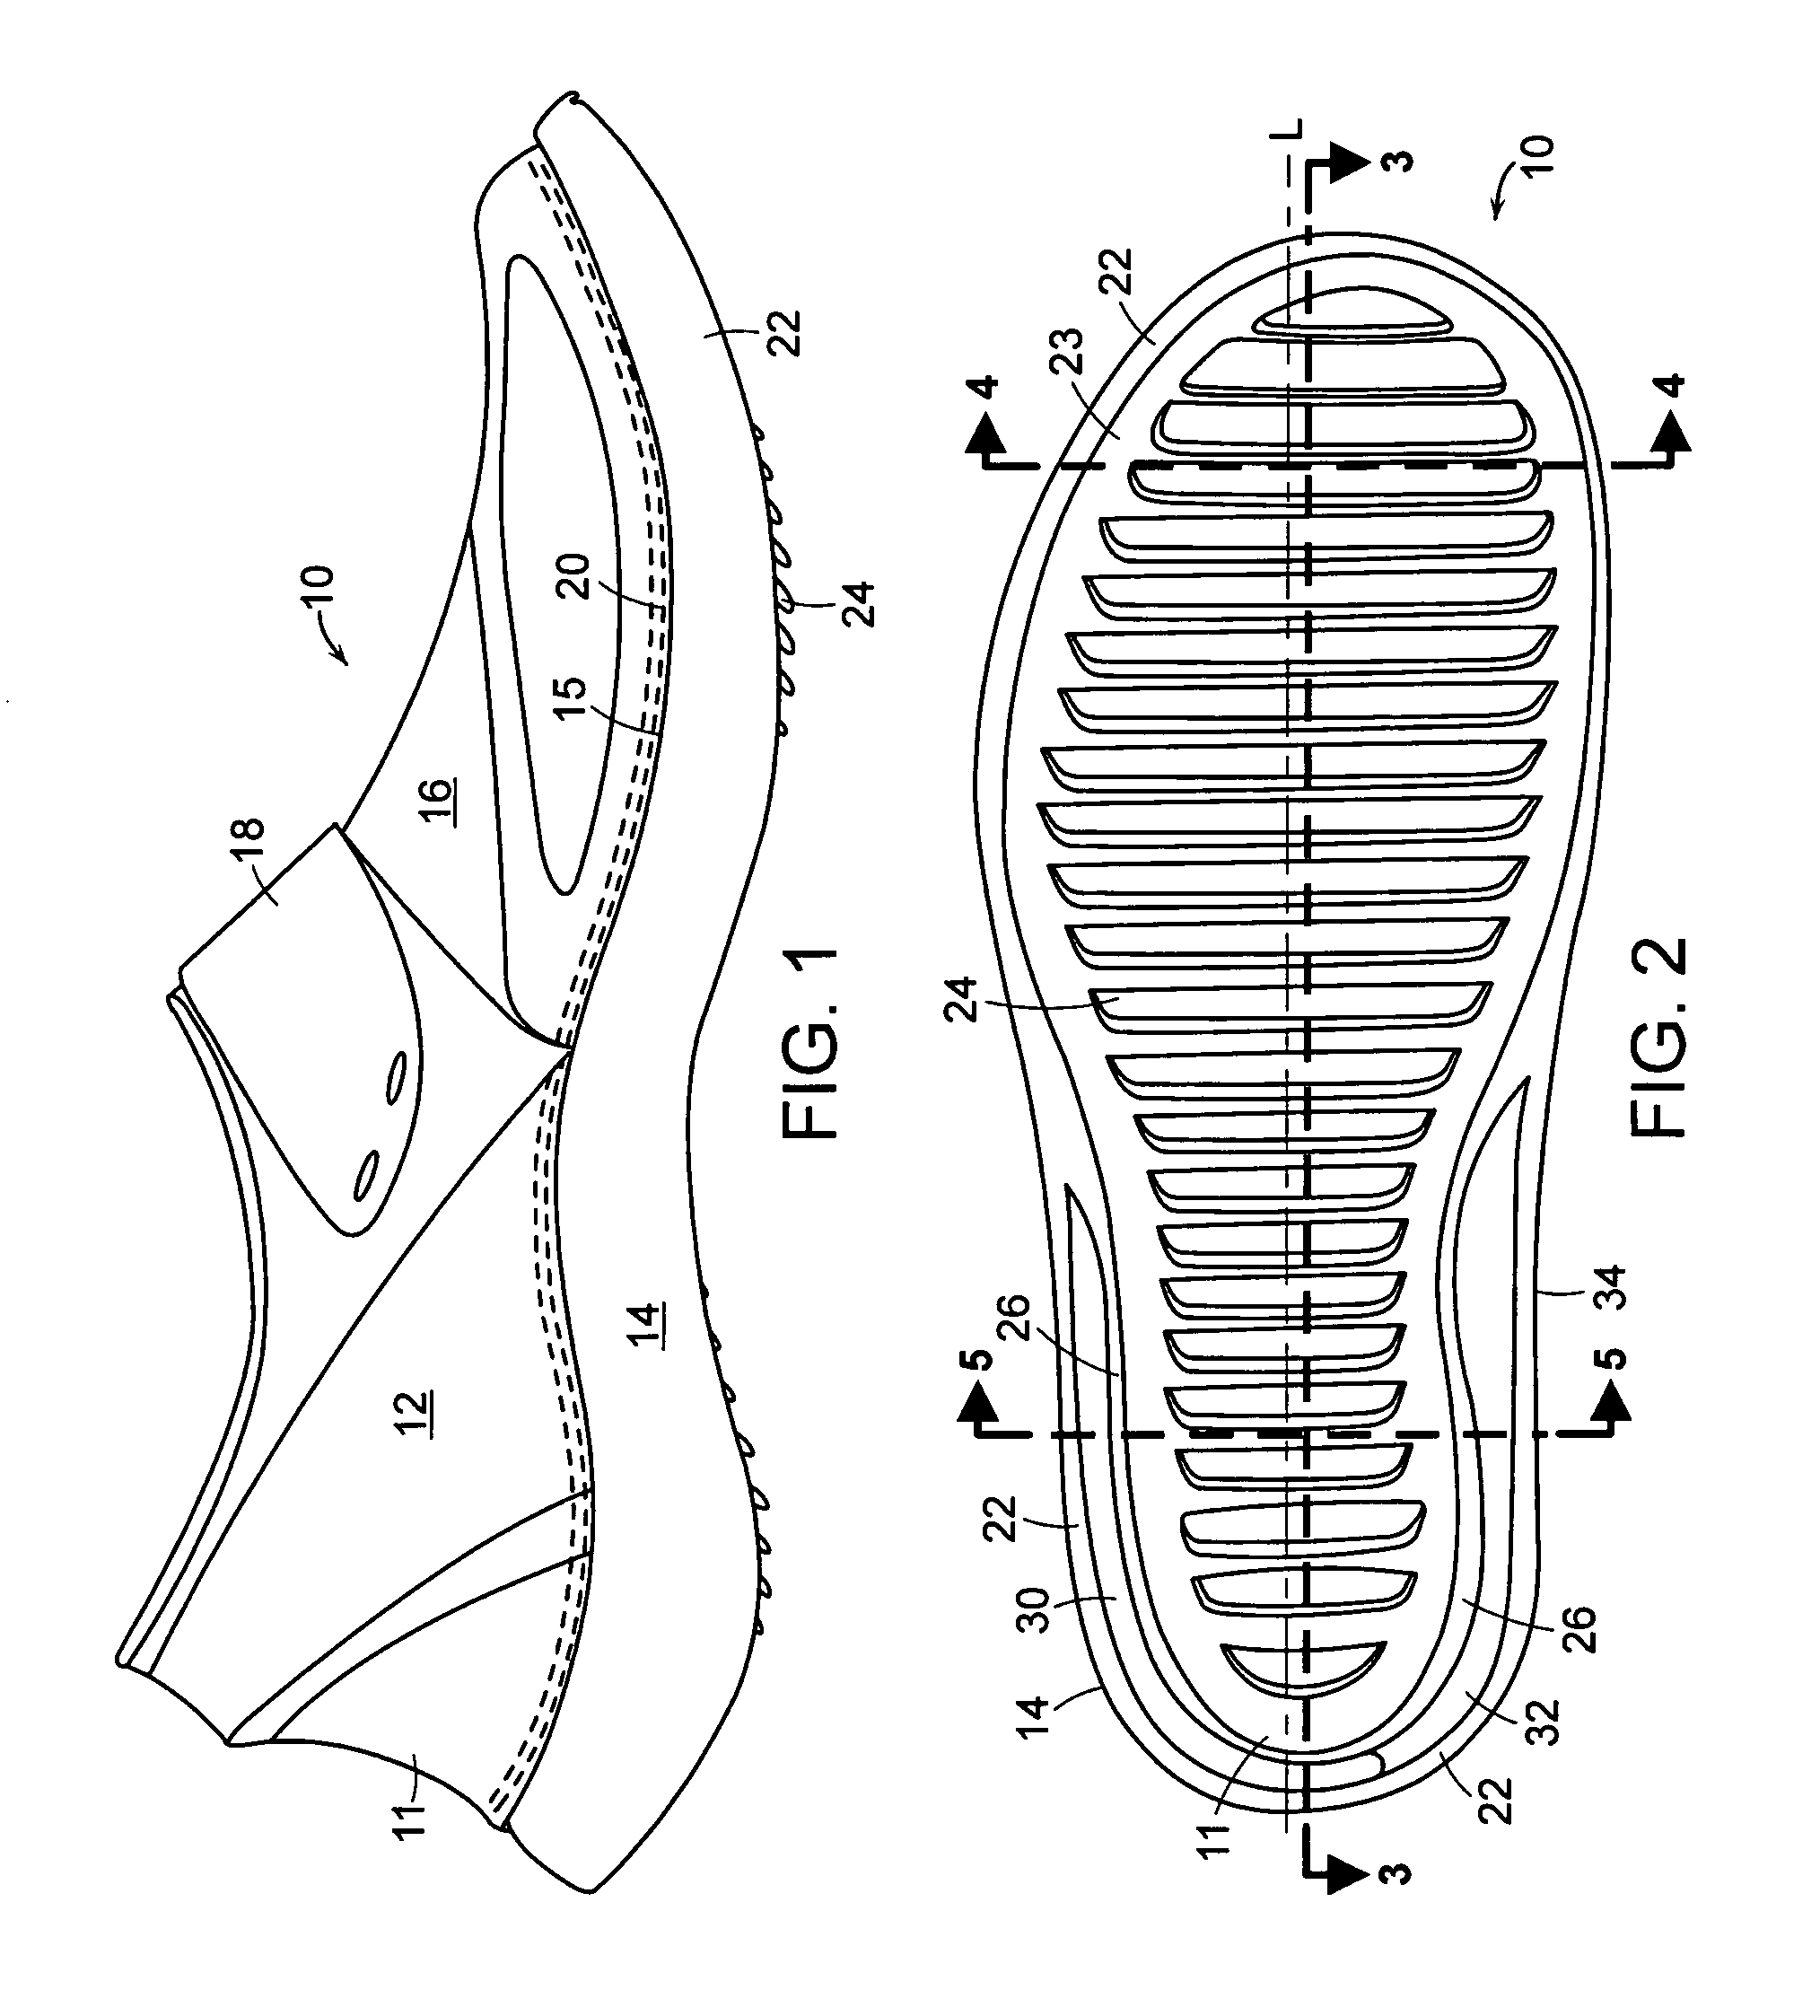 Sole for article of footwear for sand surfaces